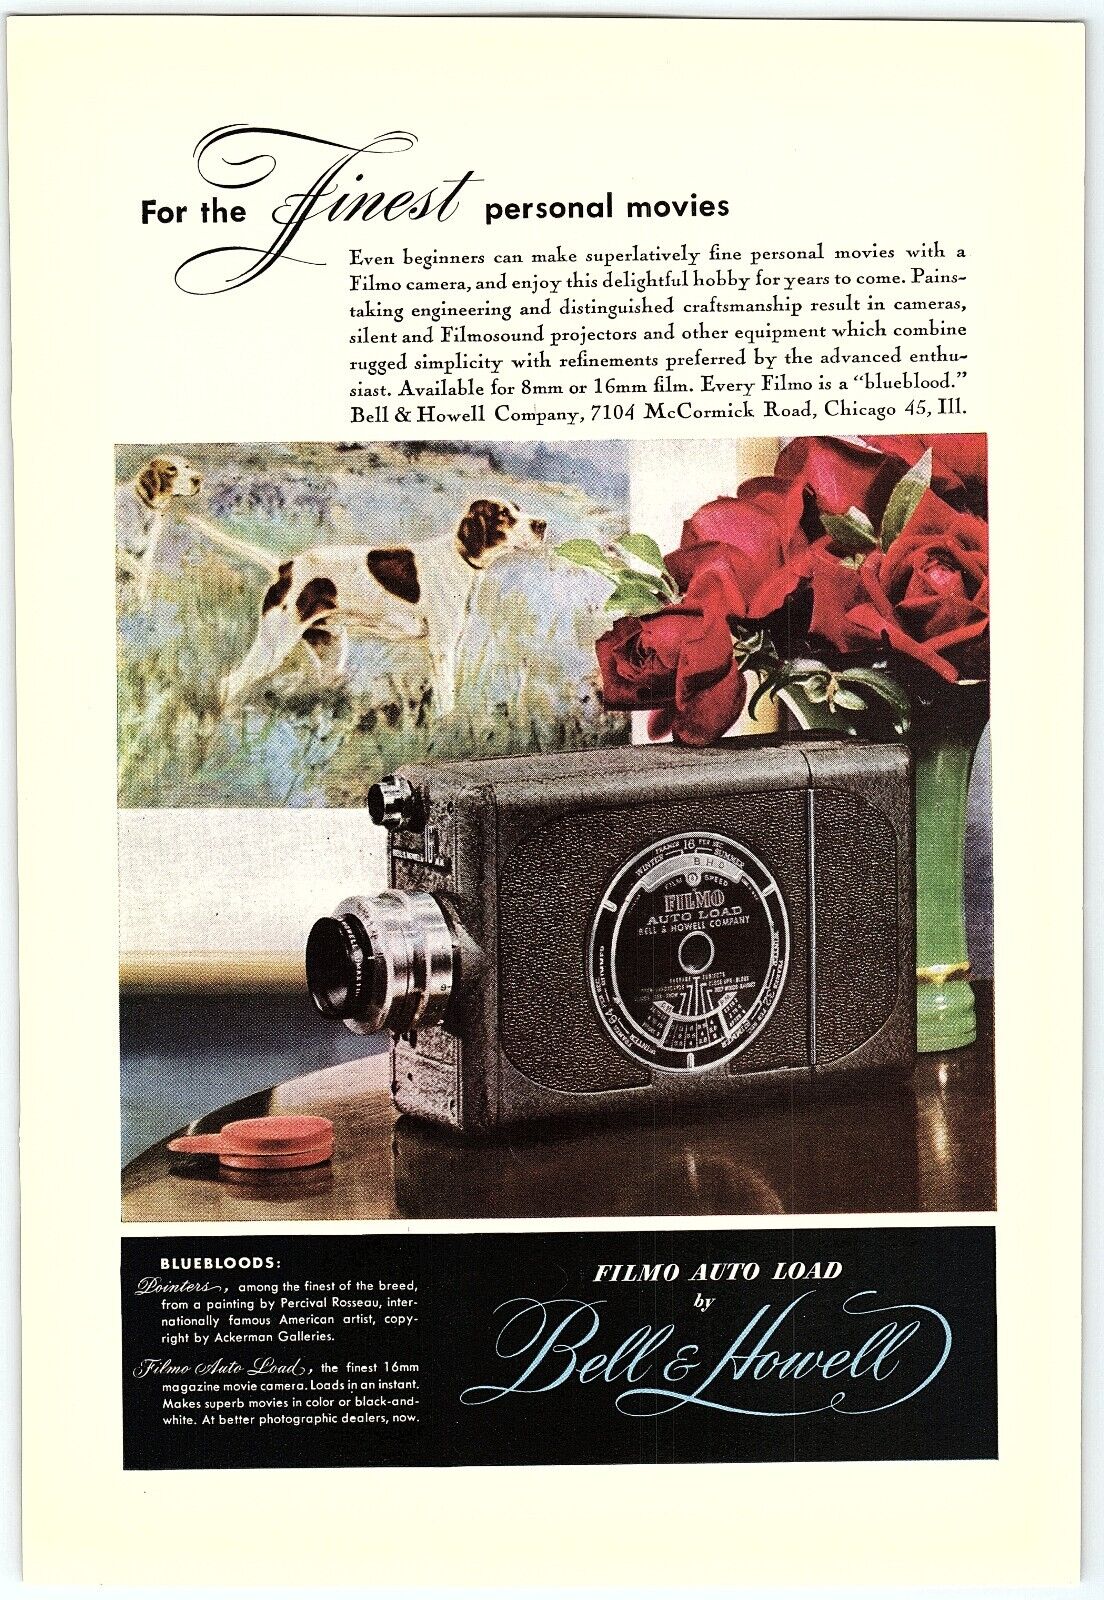 1940s BELL & HOWELL FILMO AUTO LOAD PERSONAL MOVIE CAMERA PRINT AD Z4264